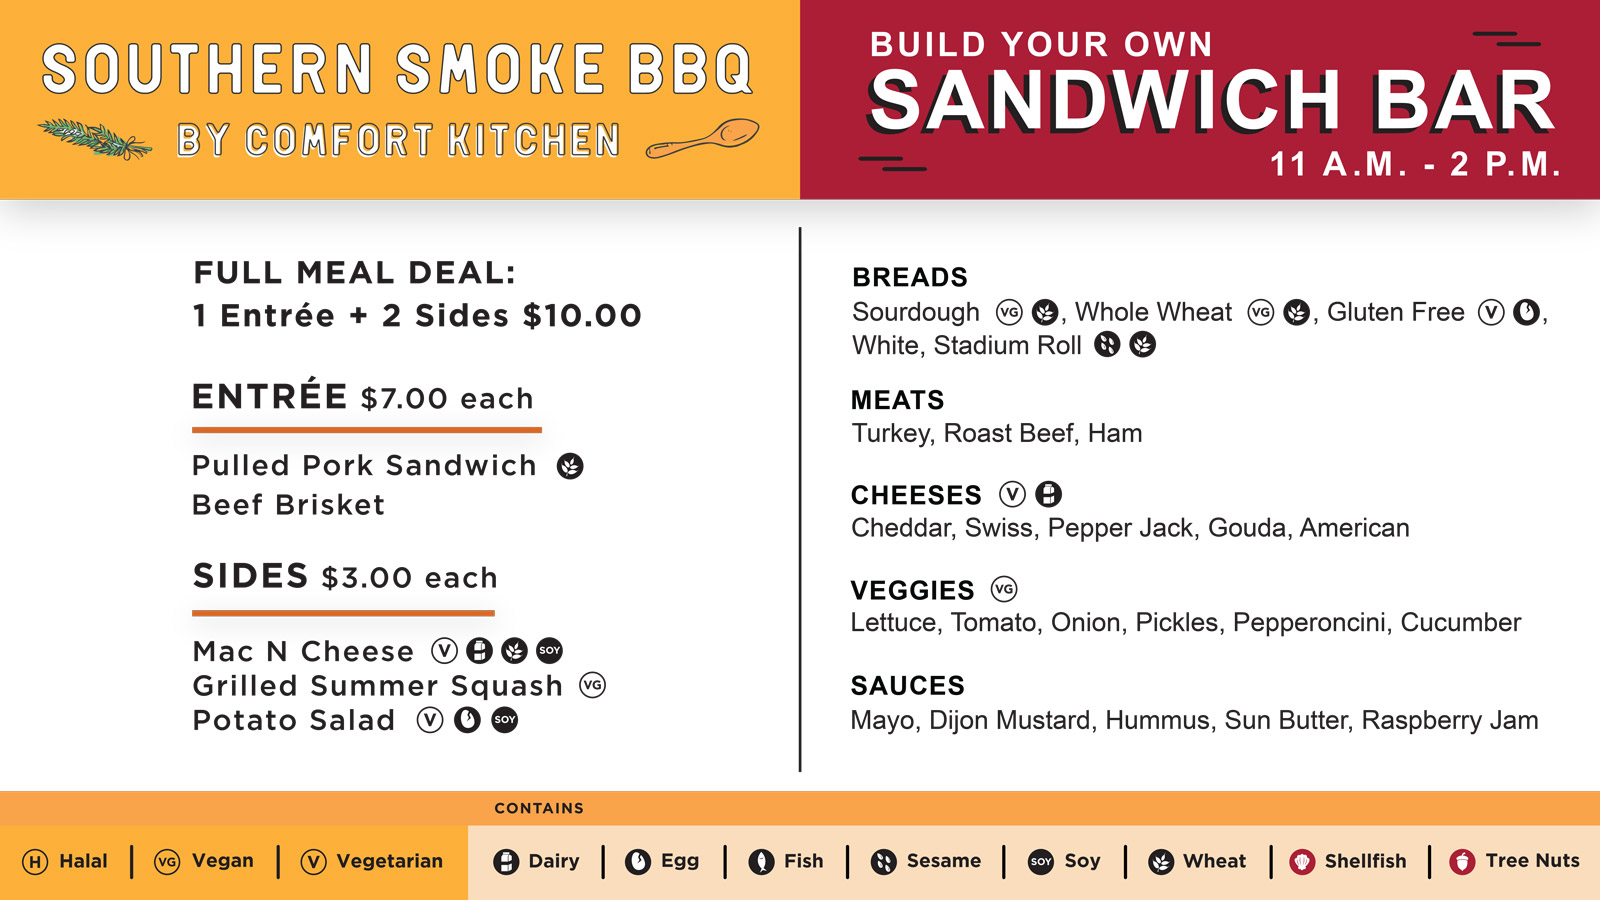 The Second Menu Board for Southern Smoke